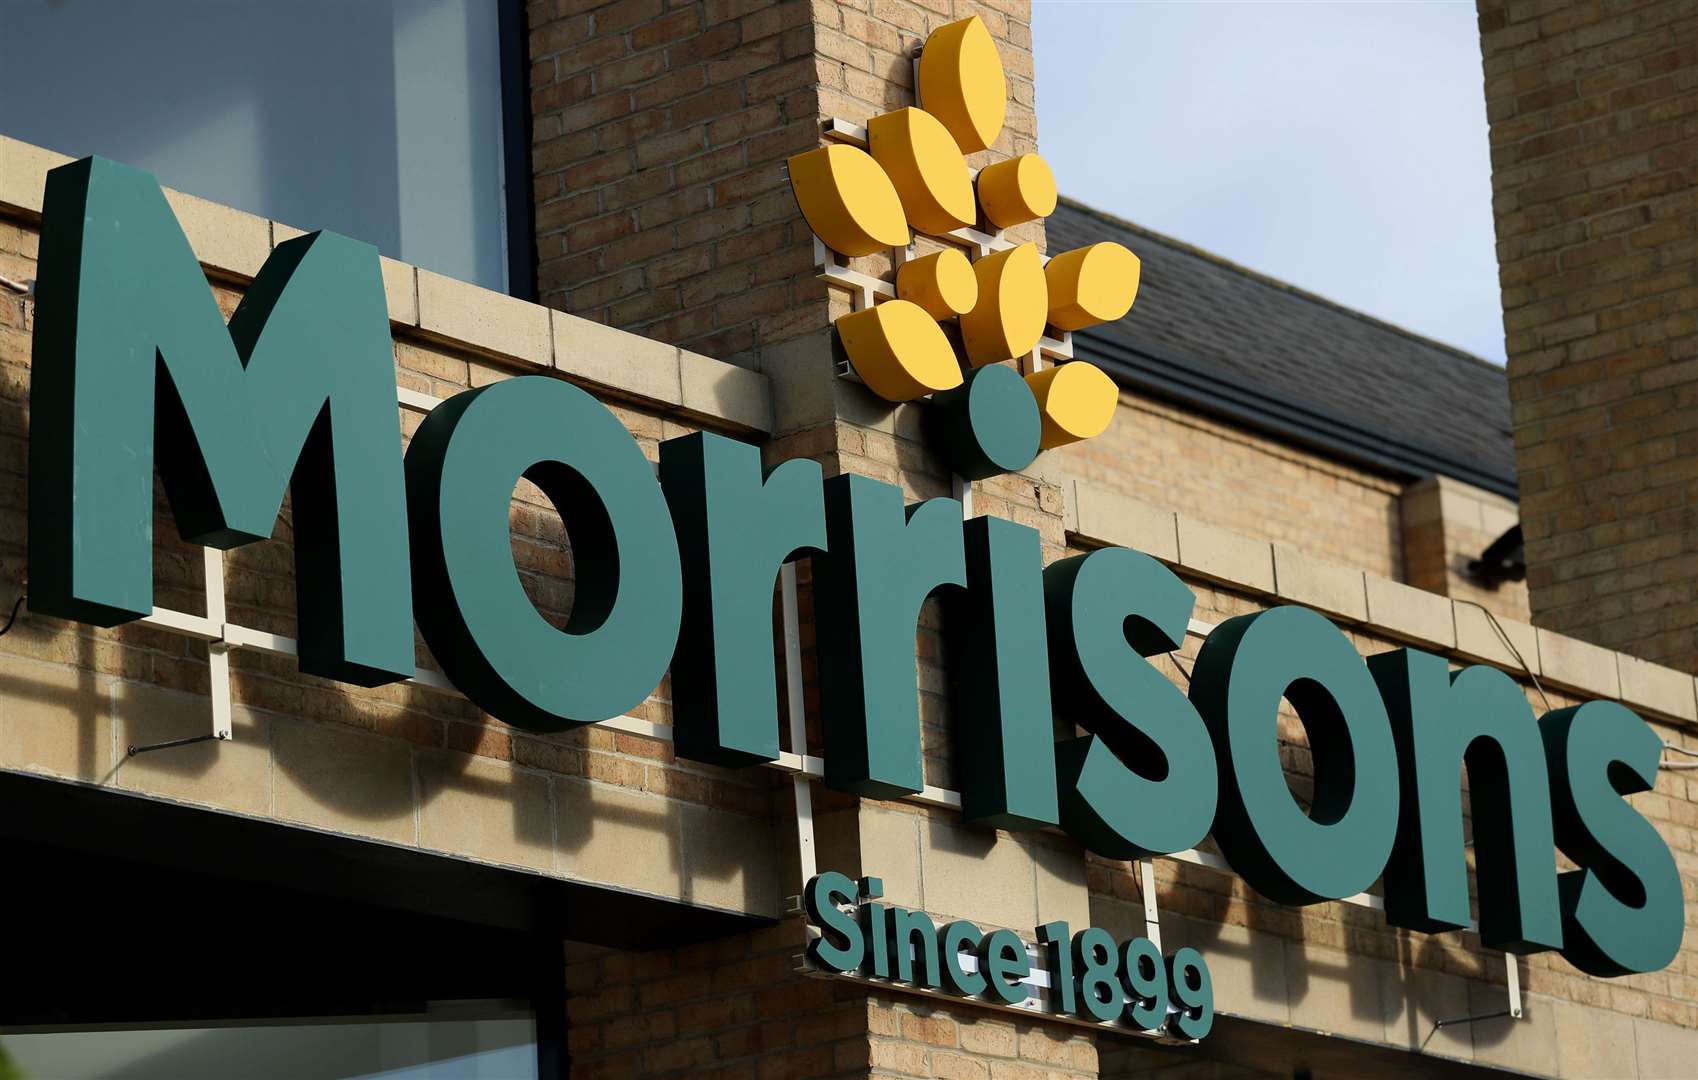 Morrisons is joining other companies including Ikea, Next and Ocado in altering the rules for unjabbed workers told to isolate